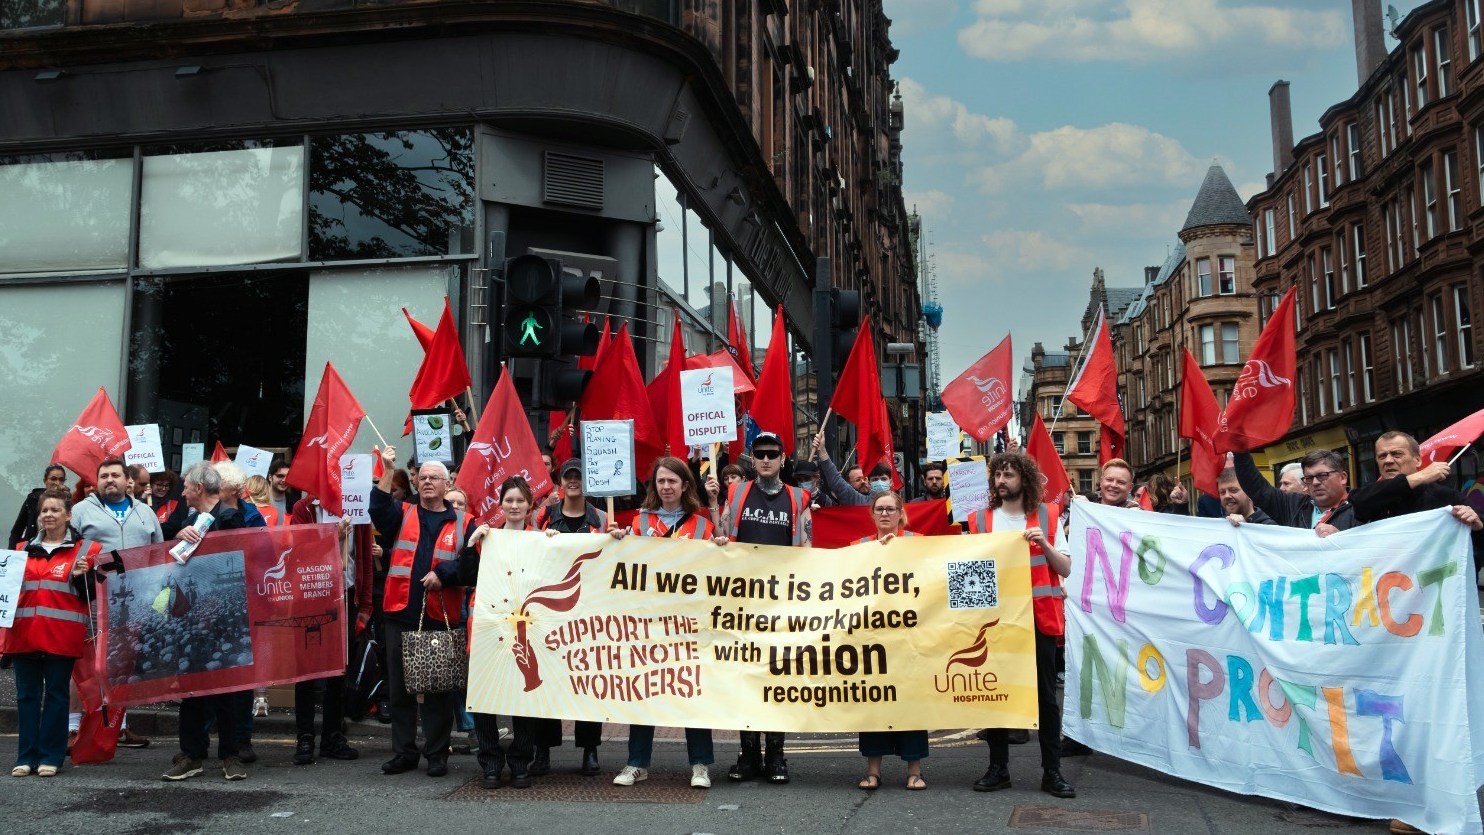 Rolling strikes by staff cut 13th Note’s turnover by £13,000 in one weekend in July